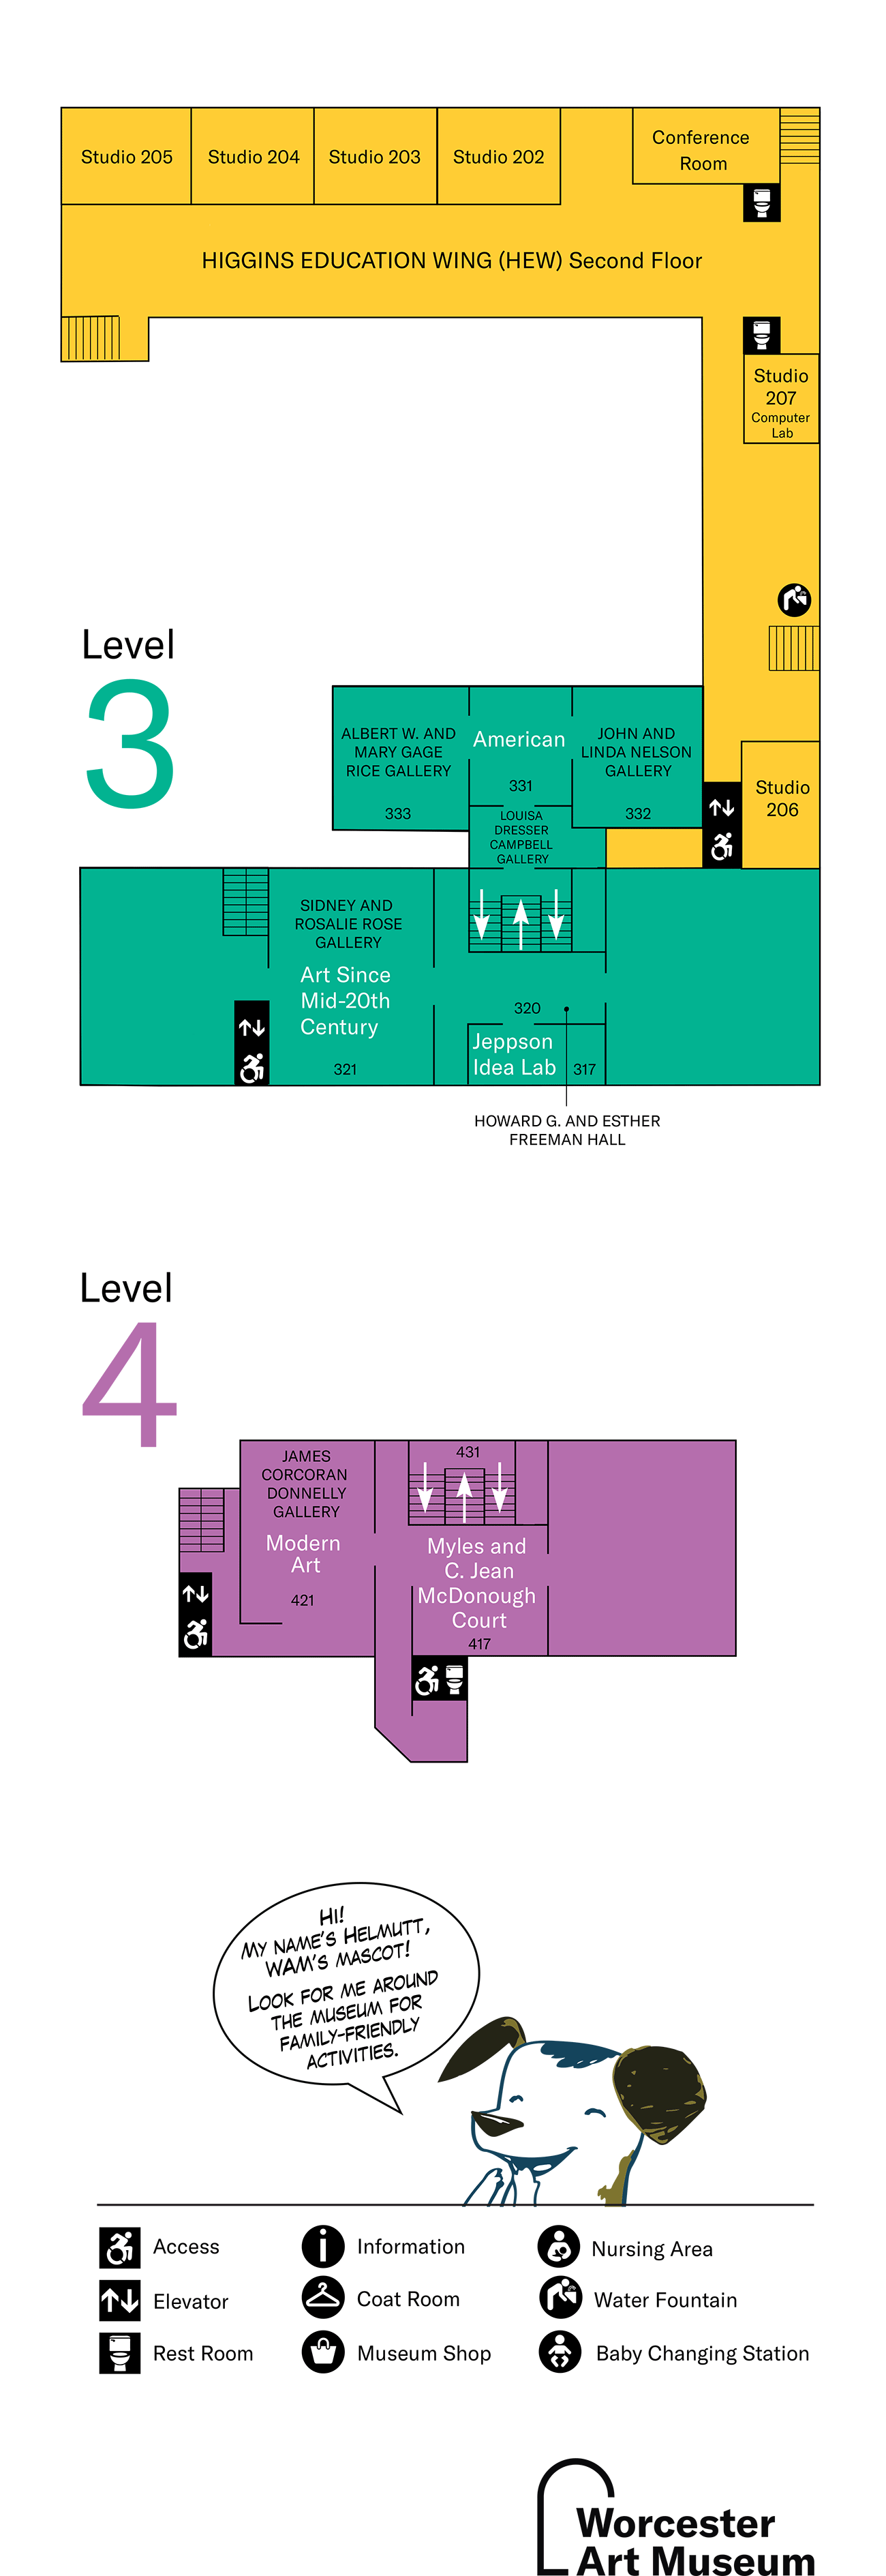 Floor map showing levels 3 and 4